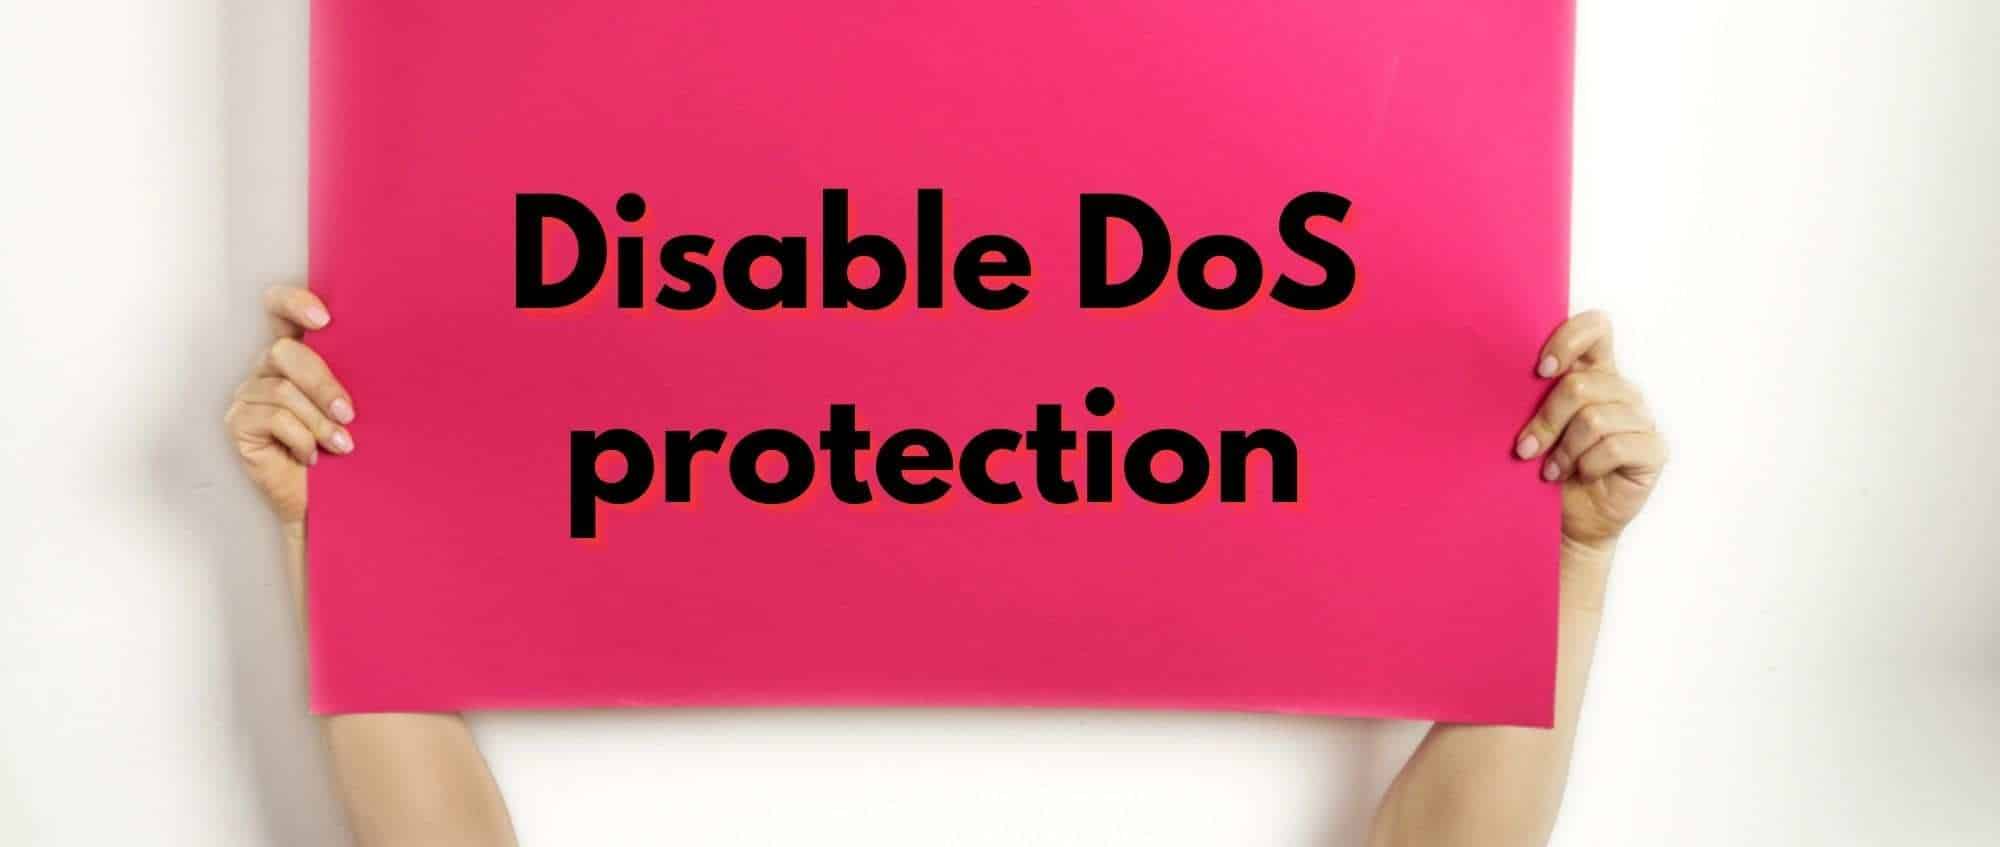 Disable DoS protection